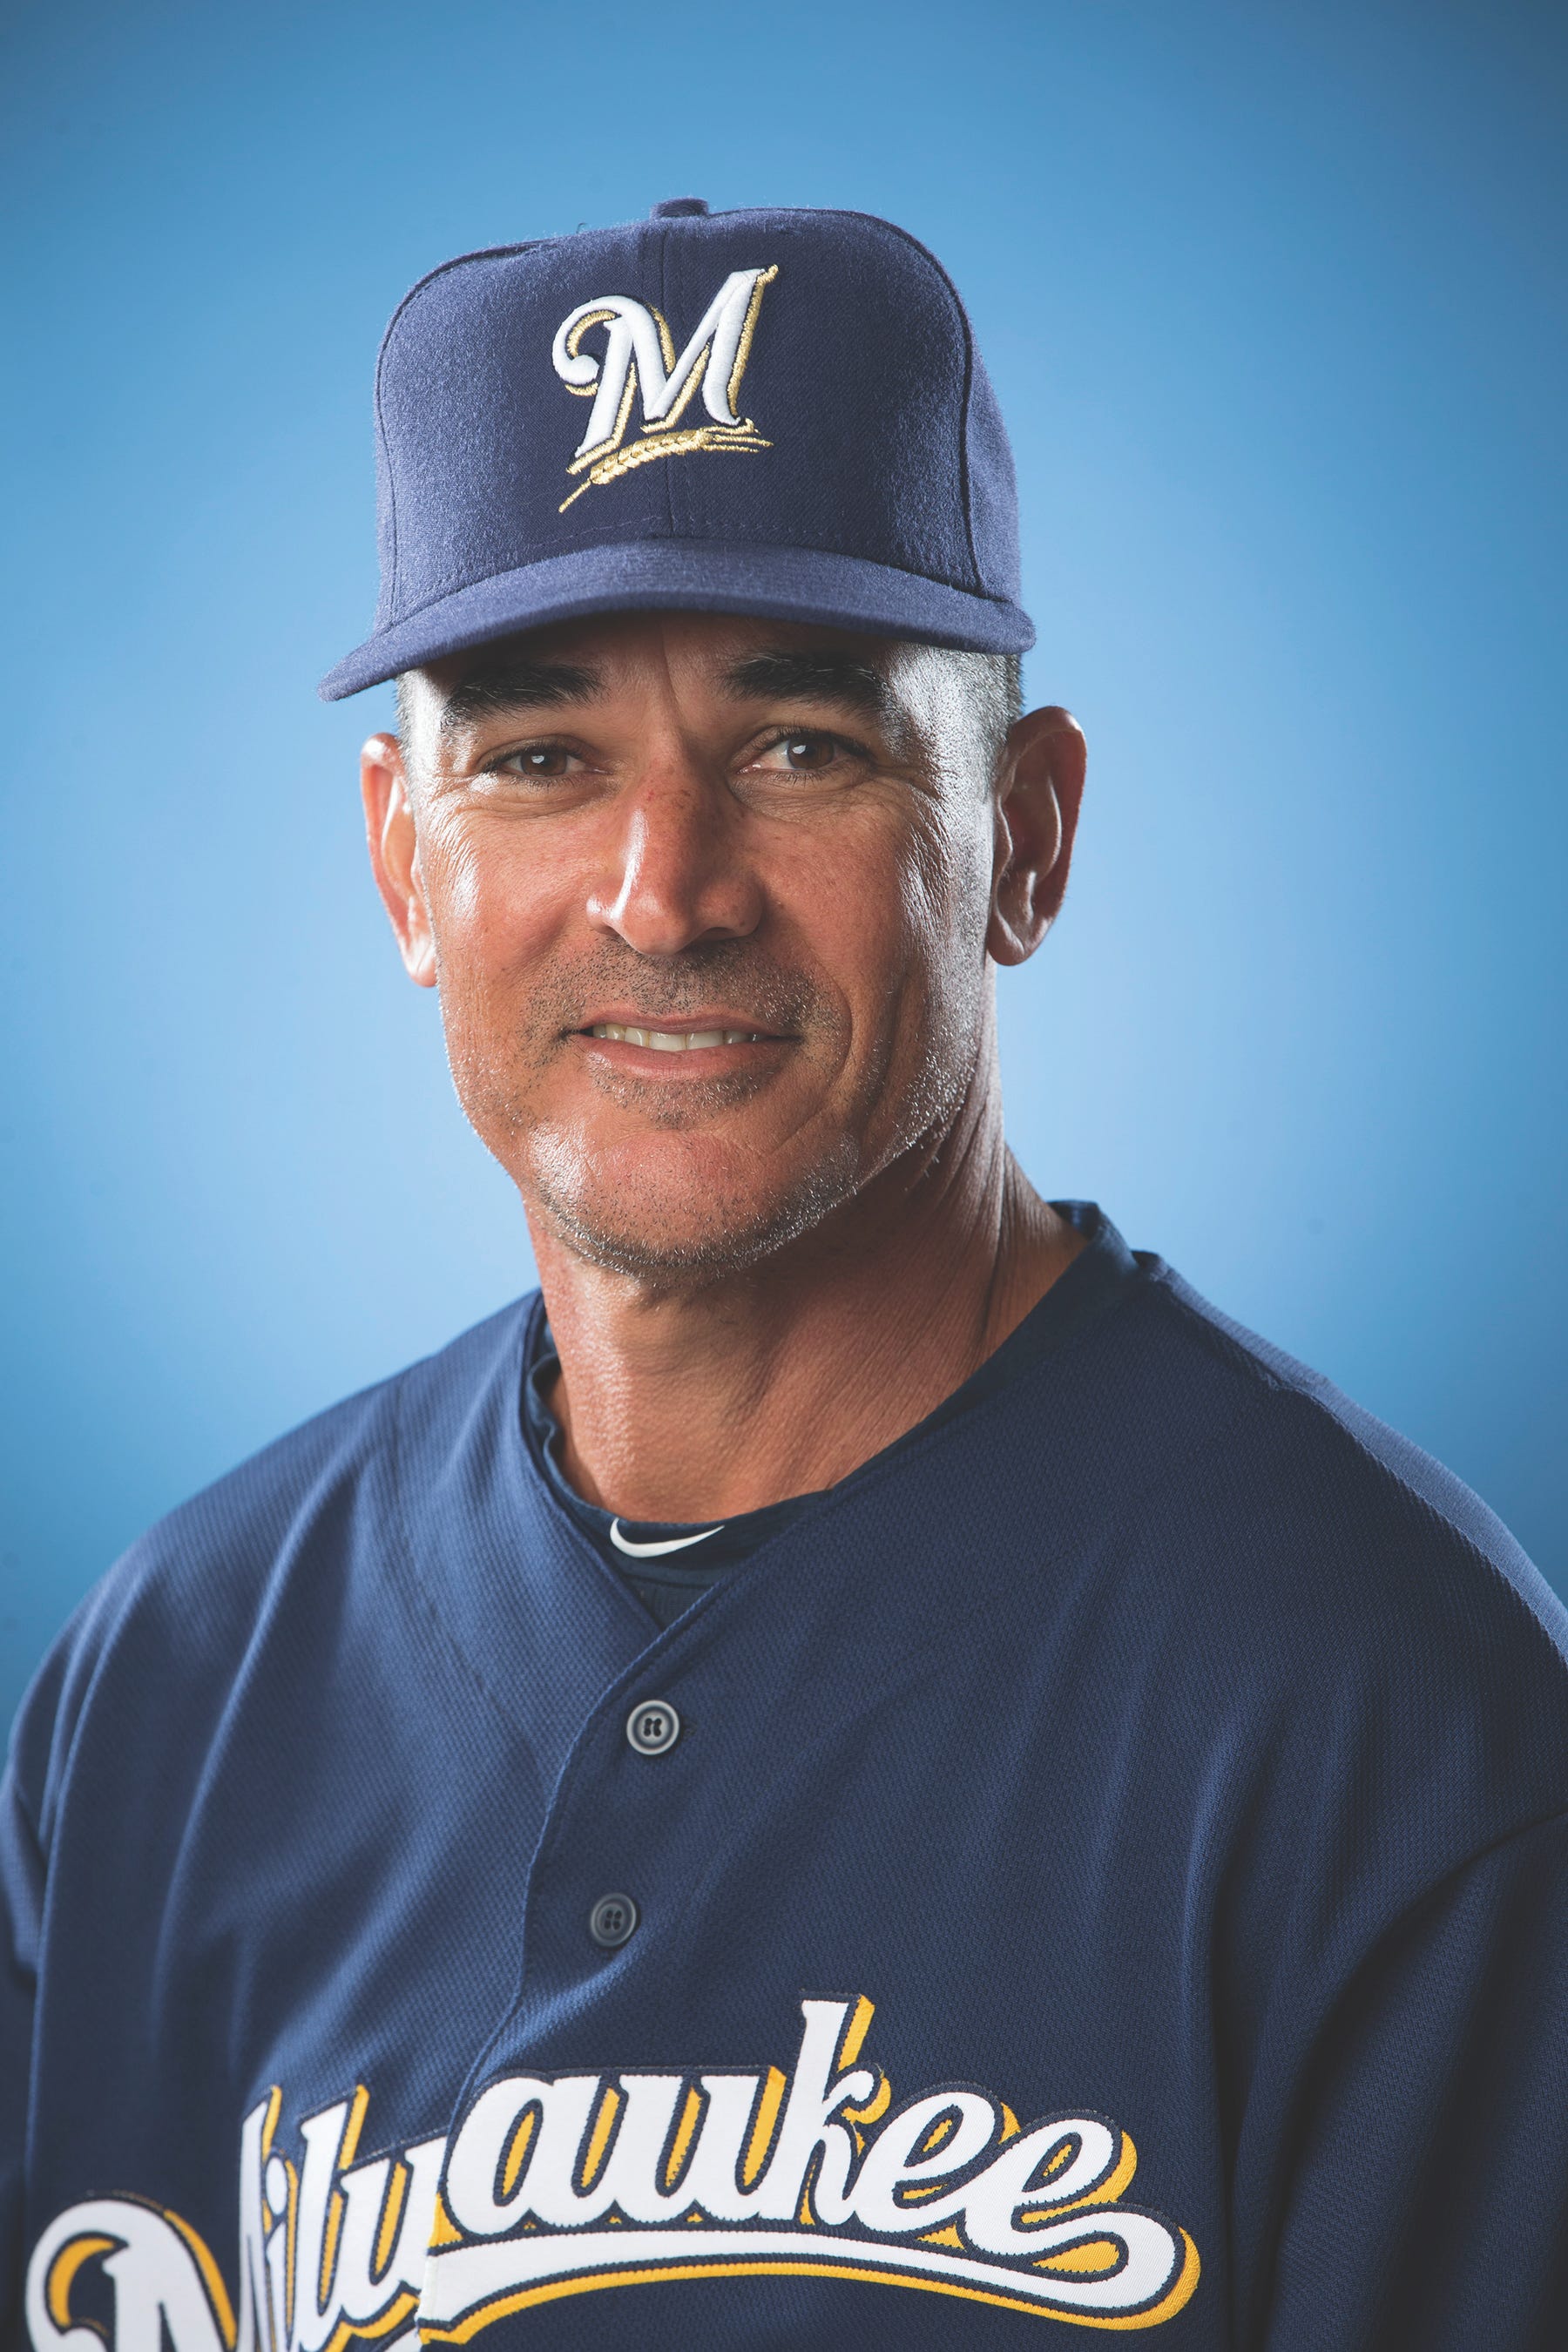 BREWERS ANNOUNCE 2019 MINORLEAGUE COACHING STAFFS by Caitlin Moyer